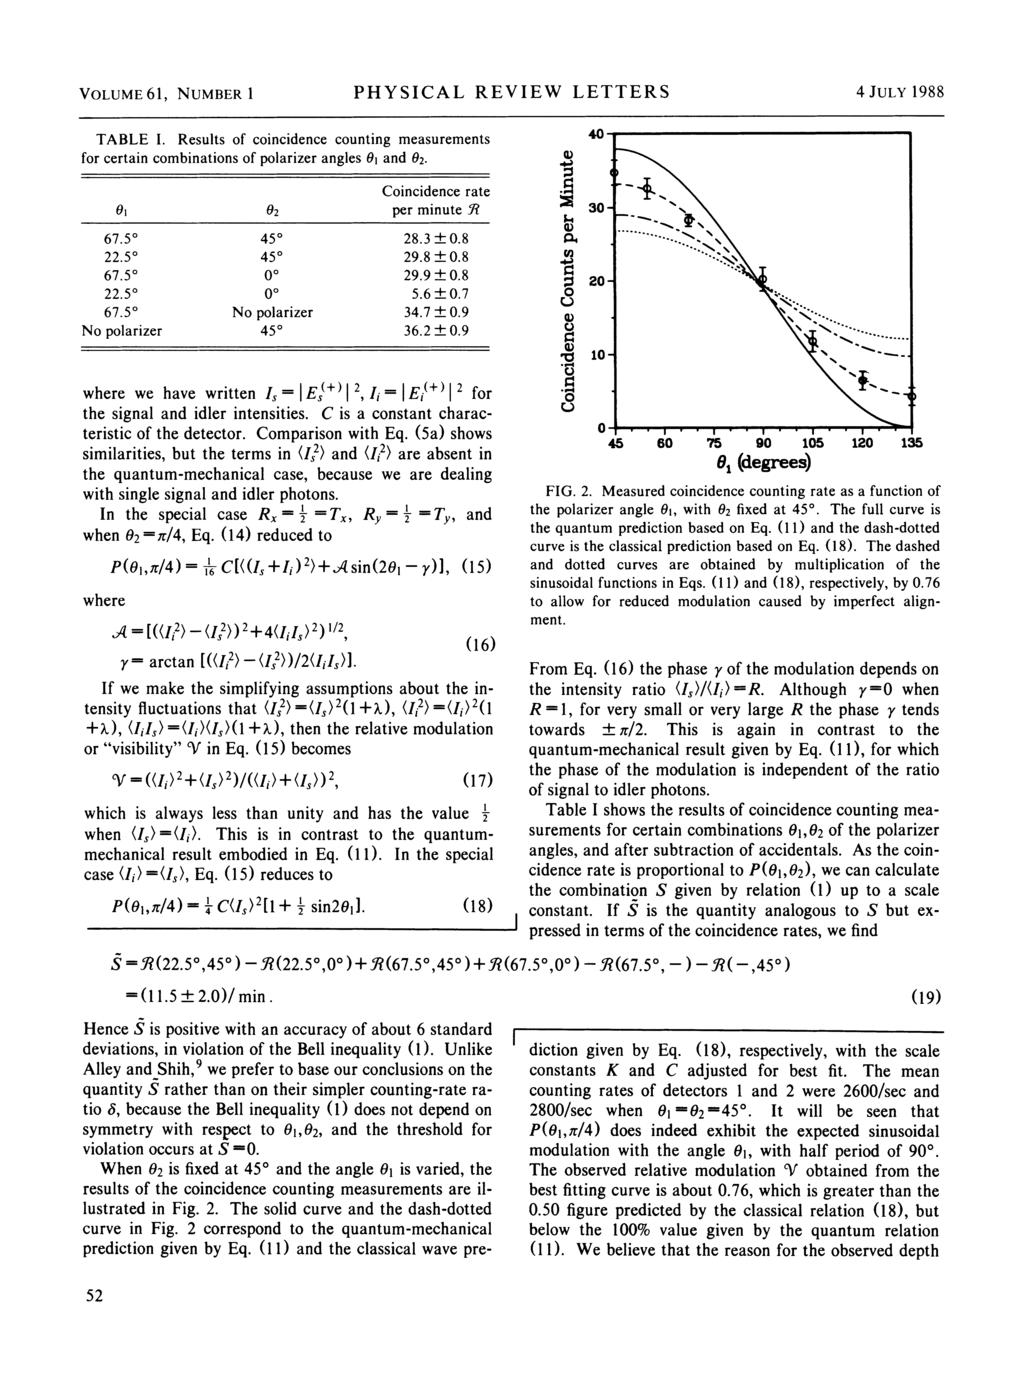 W W VOLUME 61, NUMBER 1 PHYSCAL REVEW LETTERS 4 JULY 1988 TABLE. Results of coincidence counting measurements for certain combinations of polarizer angles O and 82. 22.5 22.